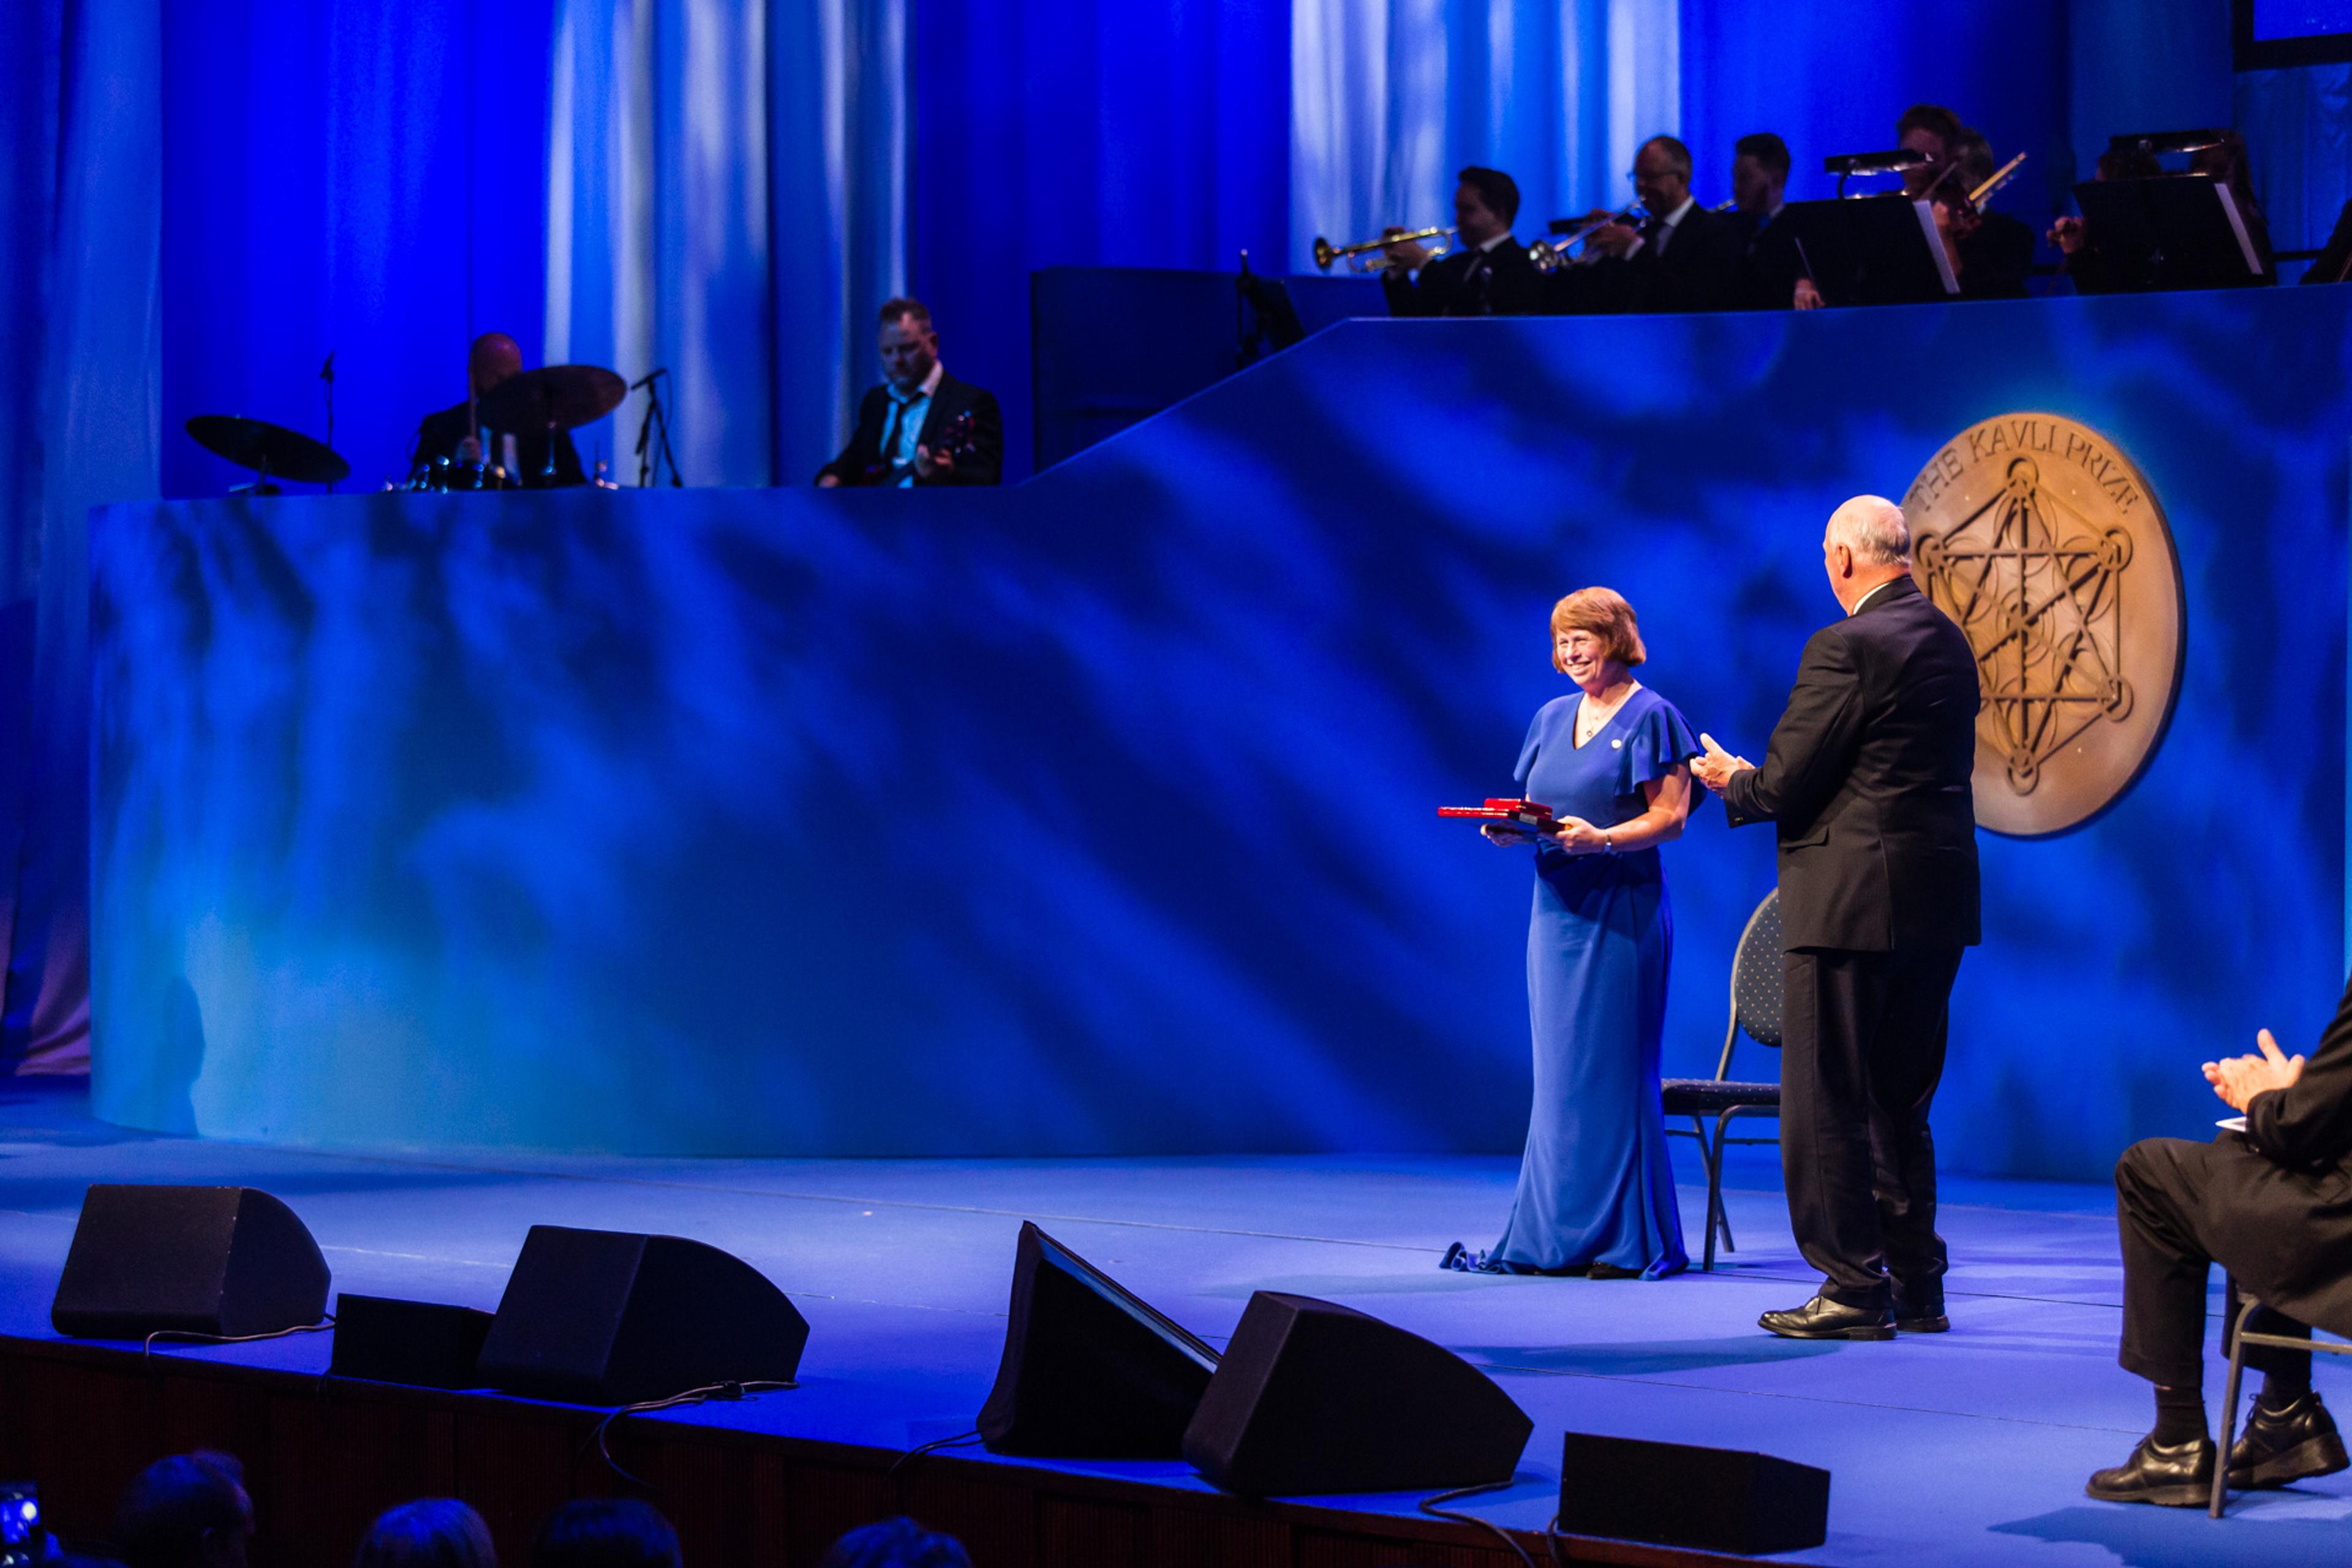 Ewine van Dishoeck on stage at the ceremony in Oslo together with His Royal Highness King Harald